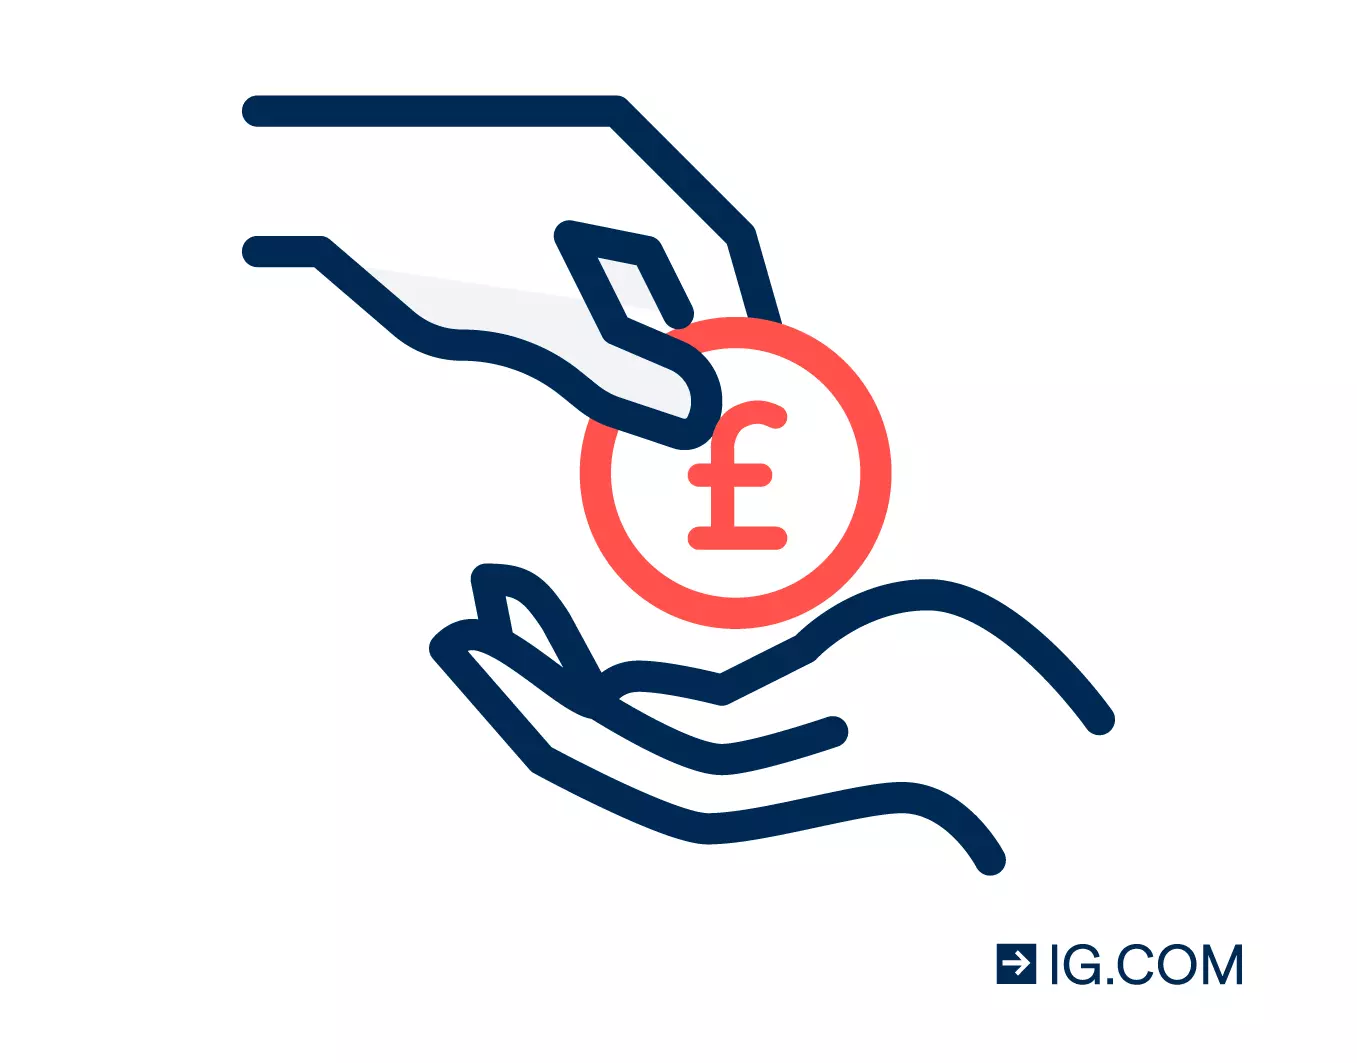 Image of two hands exchanging a coin. On the coin is the pound currency symbol.